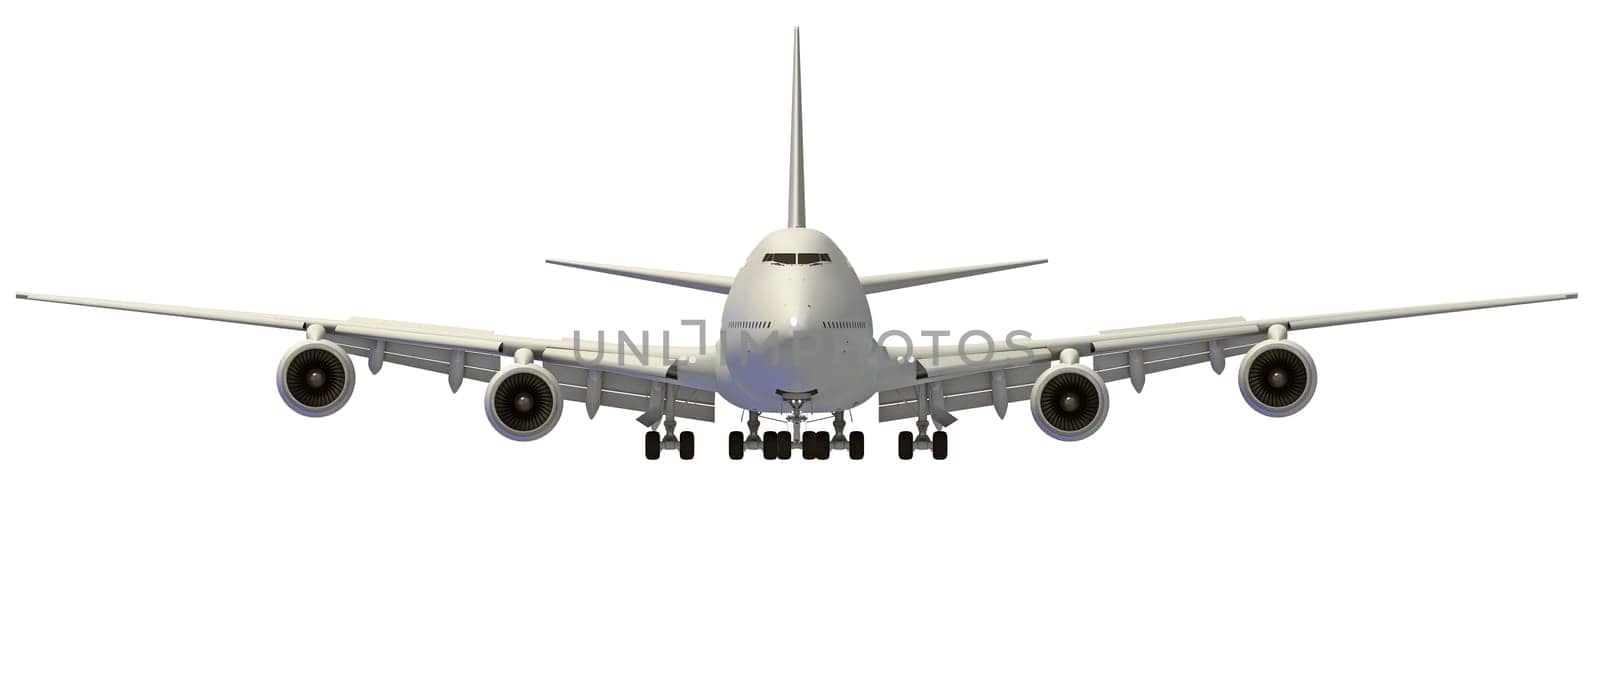 Jet Plane 3D rendering on white background by 3DHorse